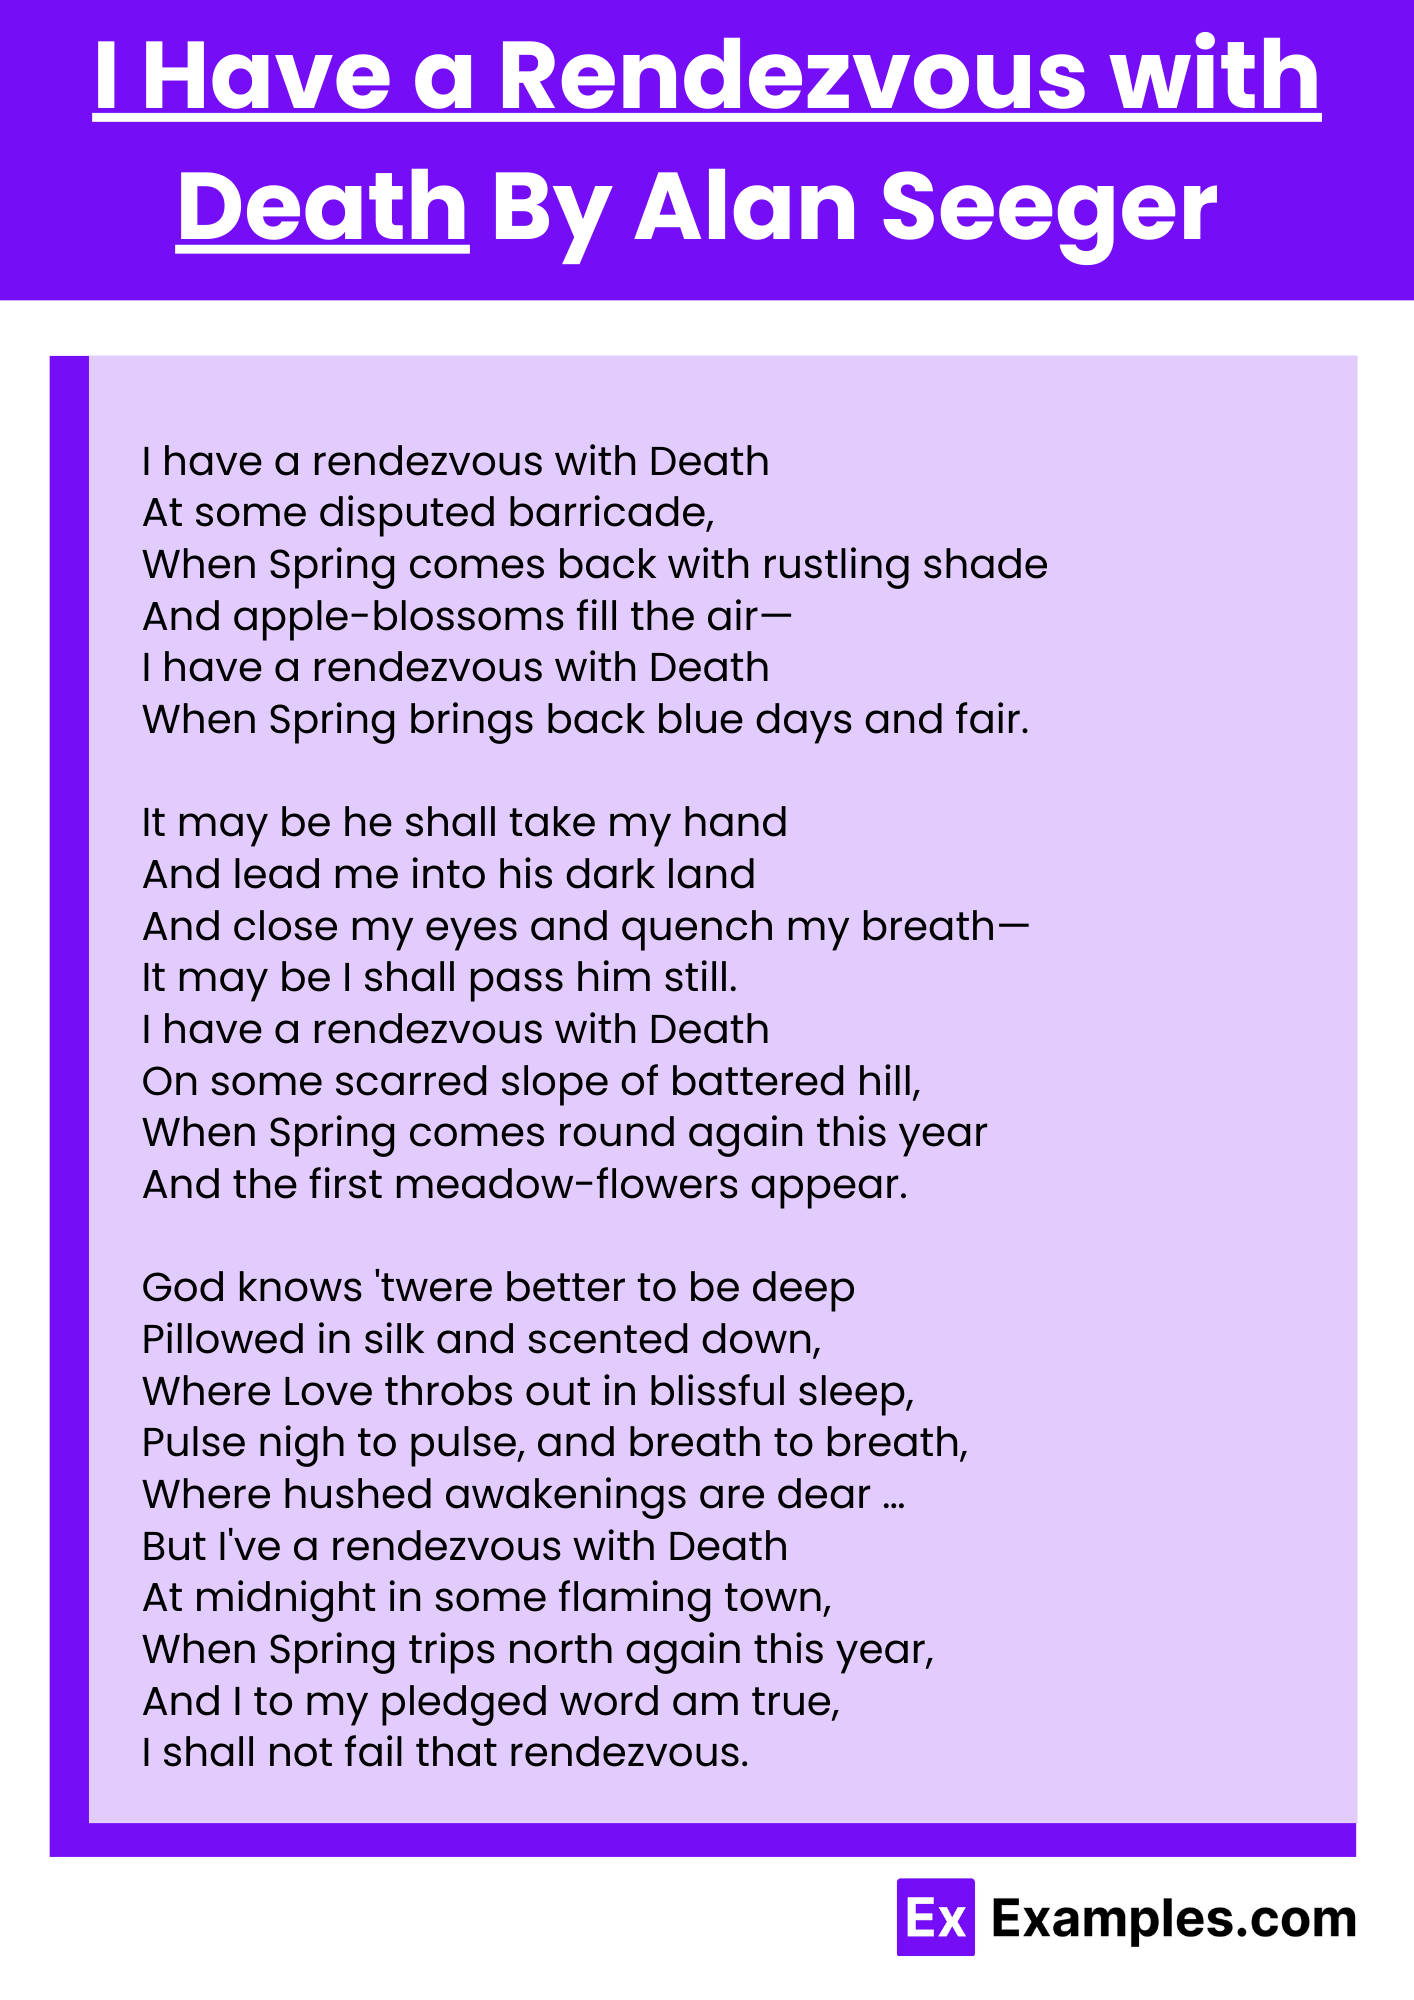 I Have a Rendezvous with Death By Alan Seeger